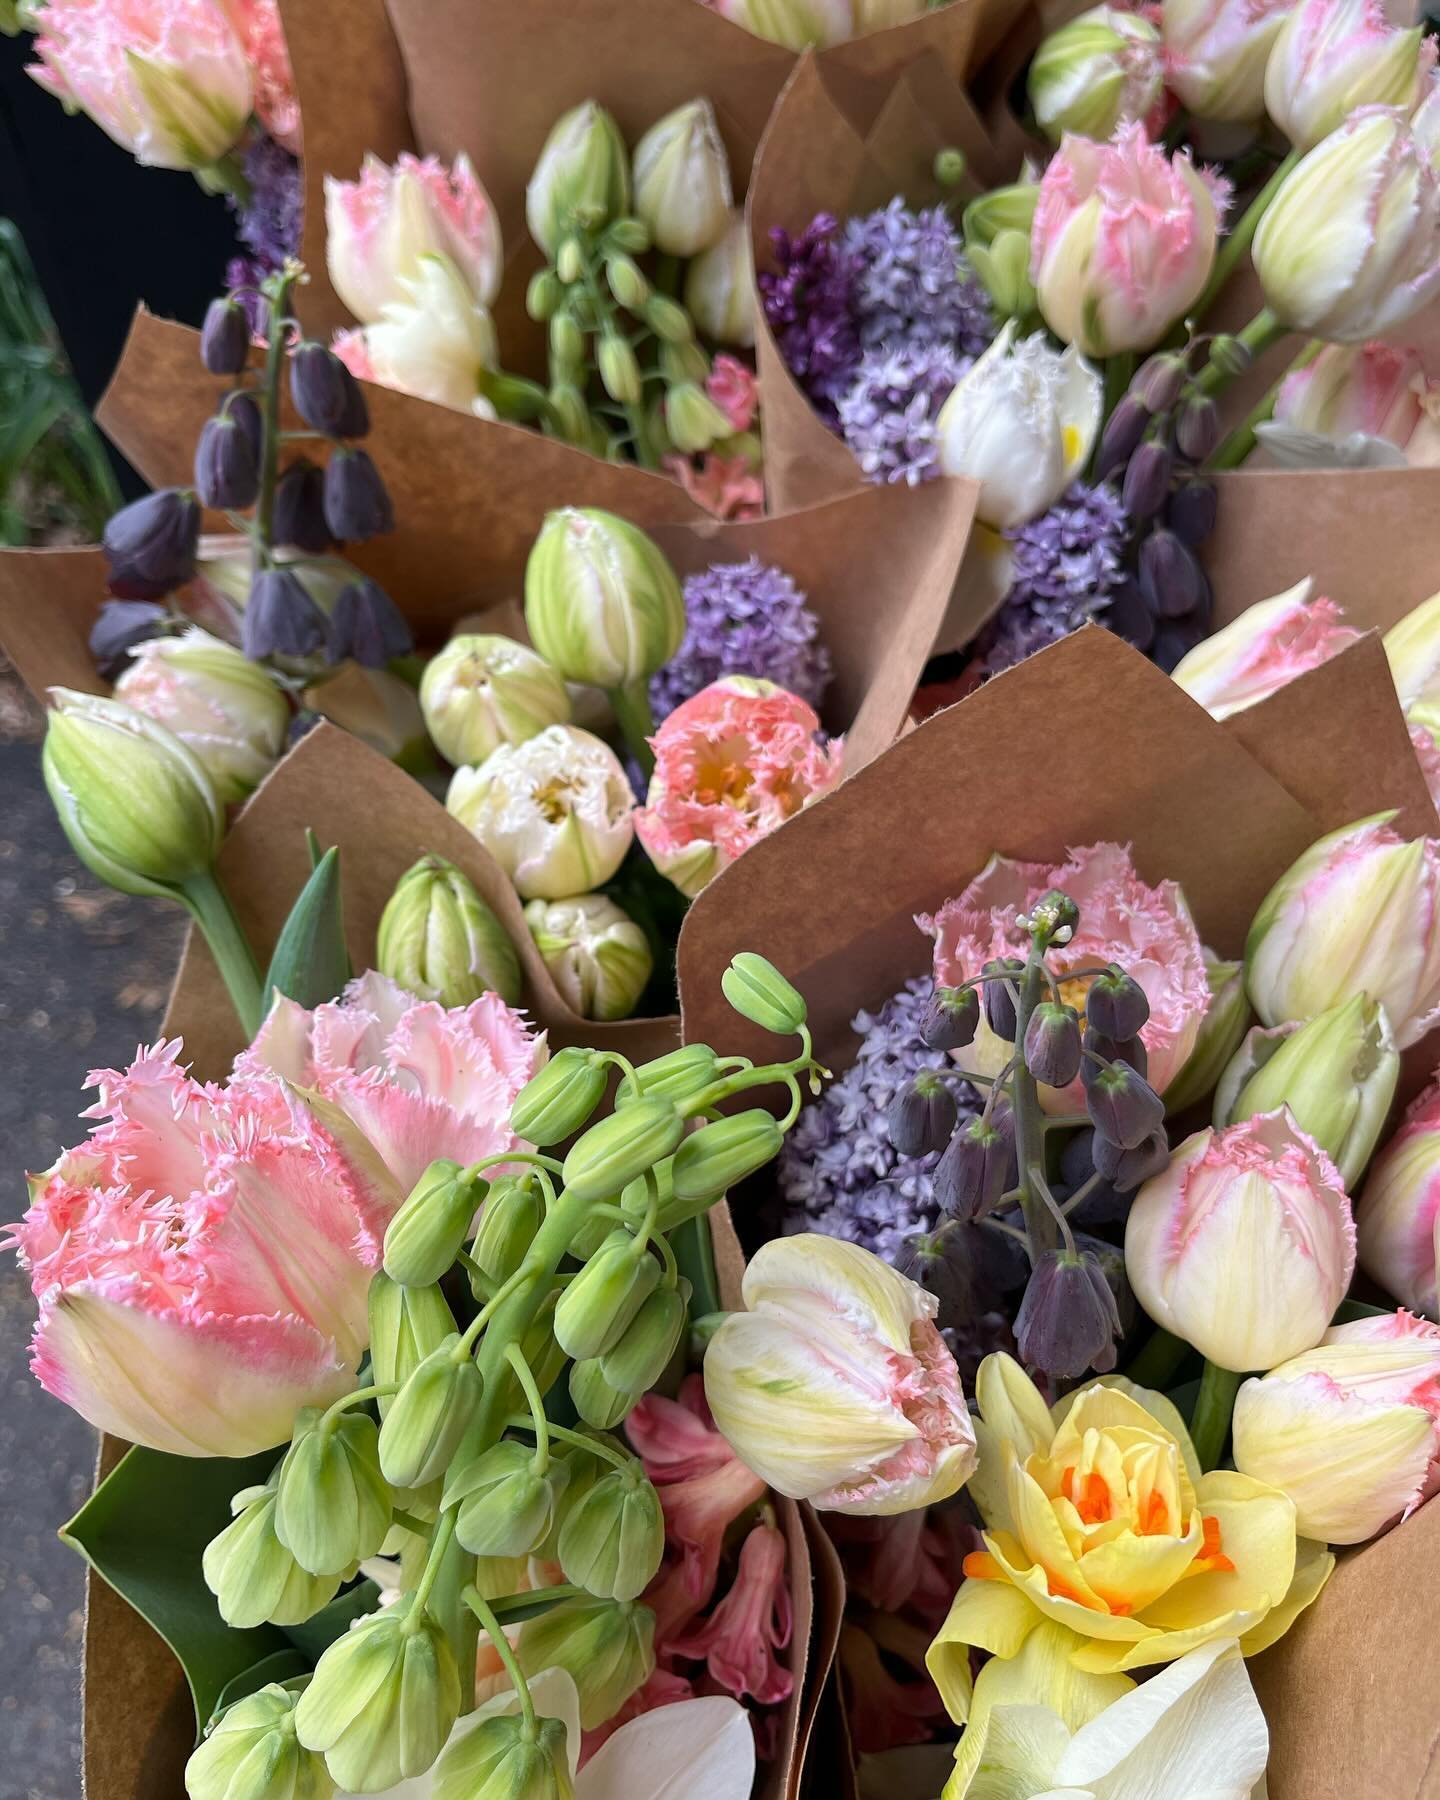 One, Two or Three? 

Which of our three bouquets palettes from yesterday is your favorite? 

Feeling very lucky to have so many beautiful flowers in bloom right now. Thank you to all our CSA members and flower friends who have visited this week. 💗